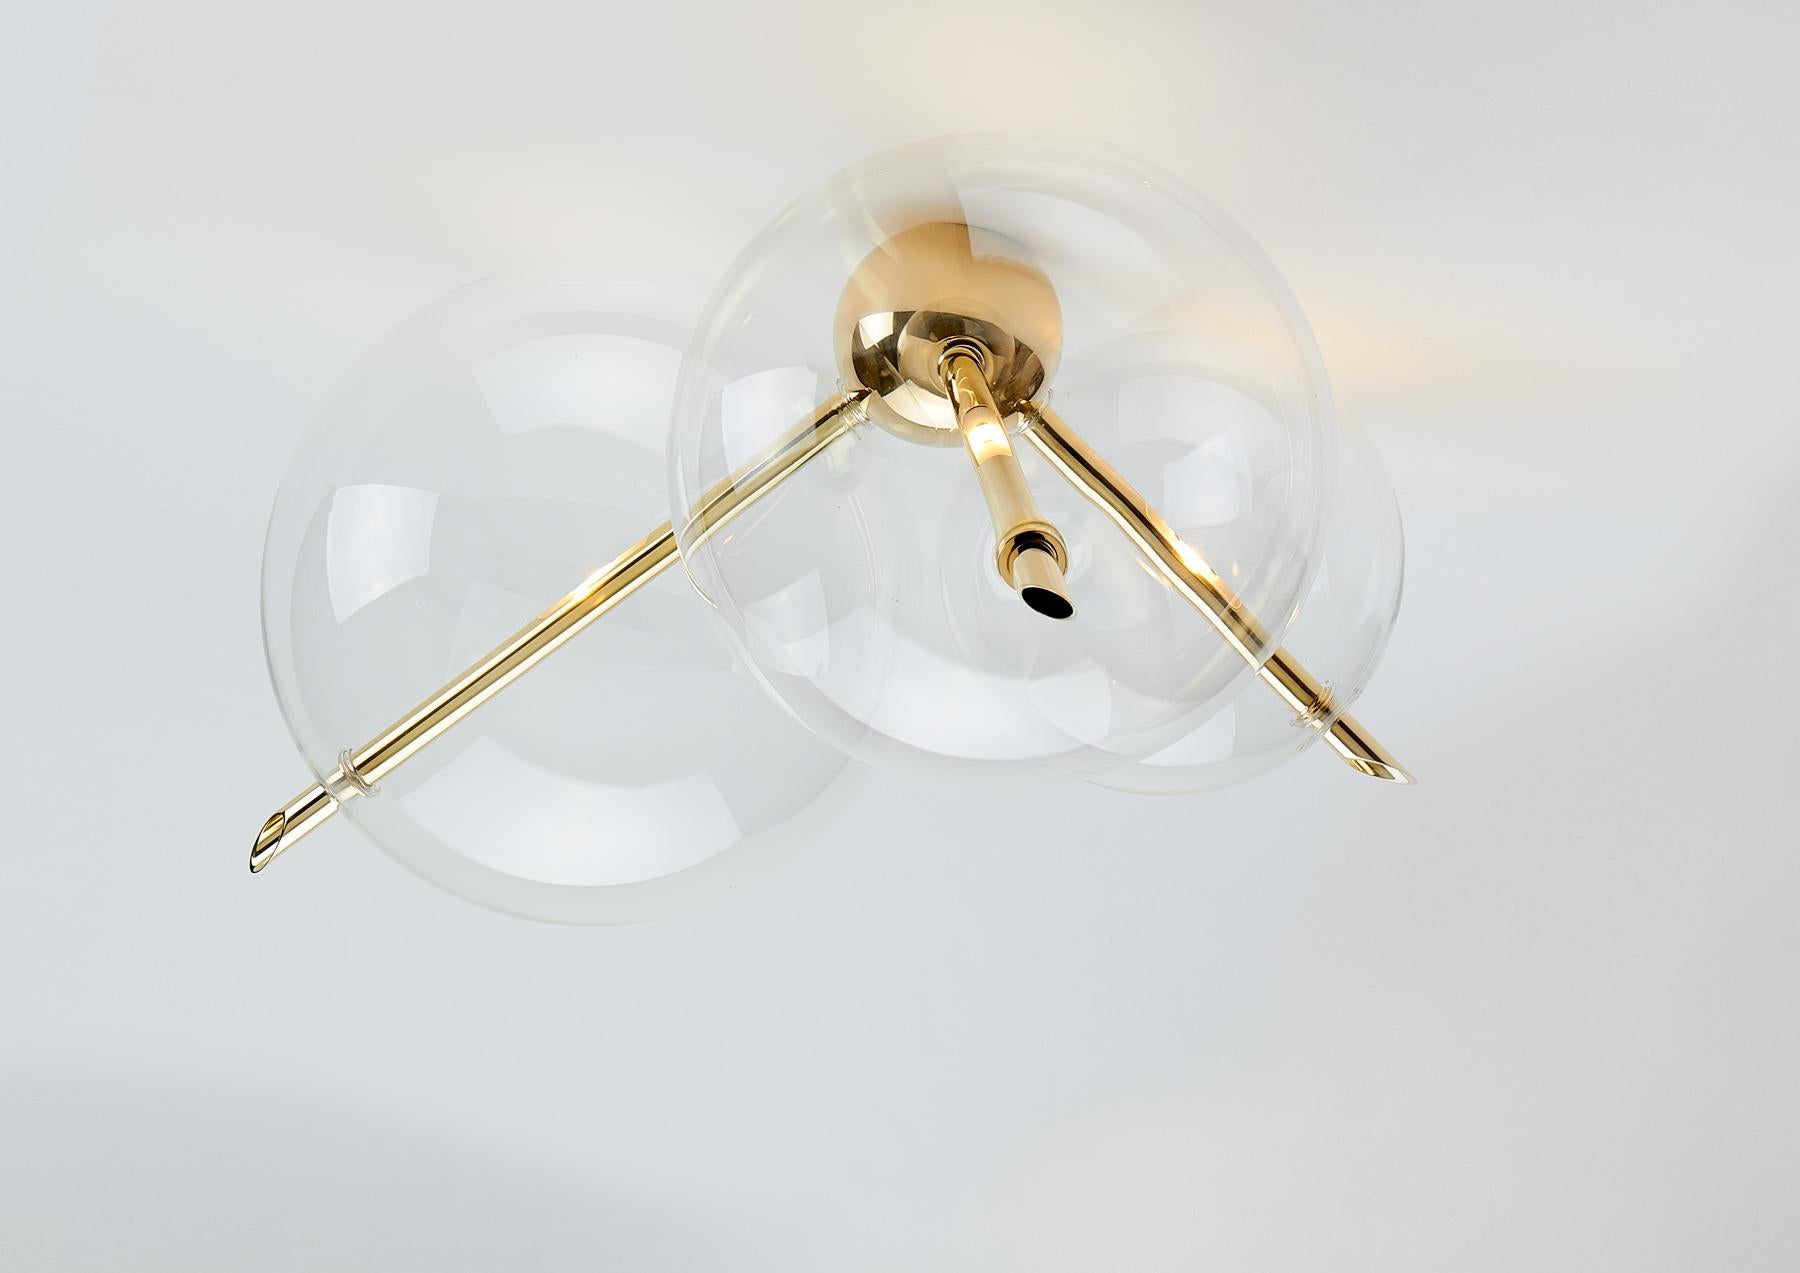 Lune Three Lights, suitable as a Wall Light or Ceiling Mount is composed by a solid Brass Sphere and  Three Hand-Blown Glass Globes.
The Light gets out from the three Brass rod crossing over the spheres, and through them, it is diffused softly